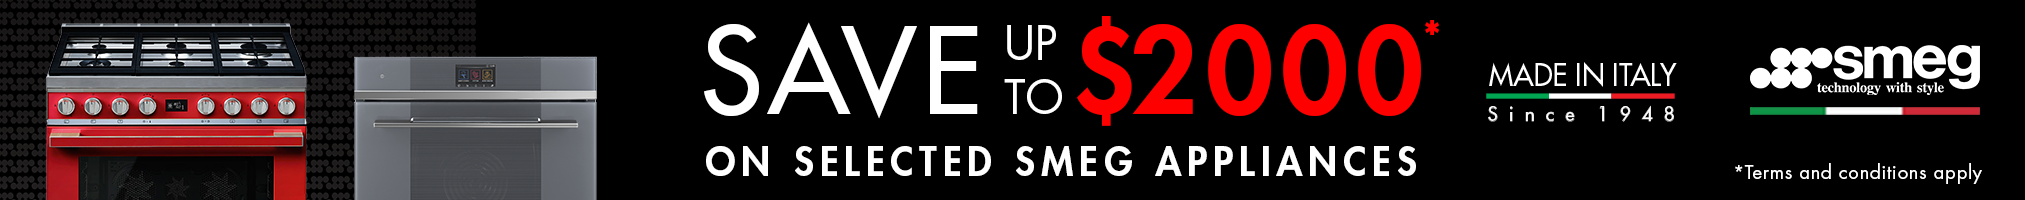 Save Up To $2000 on Selected Smeg Appliances